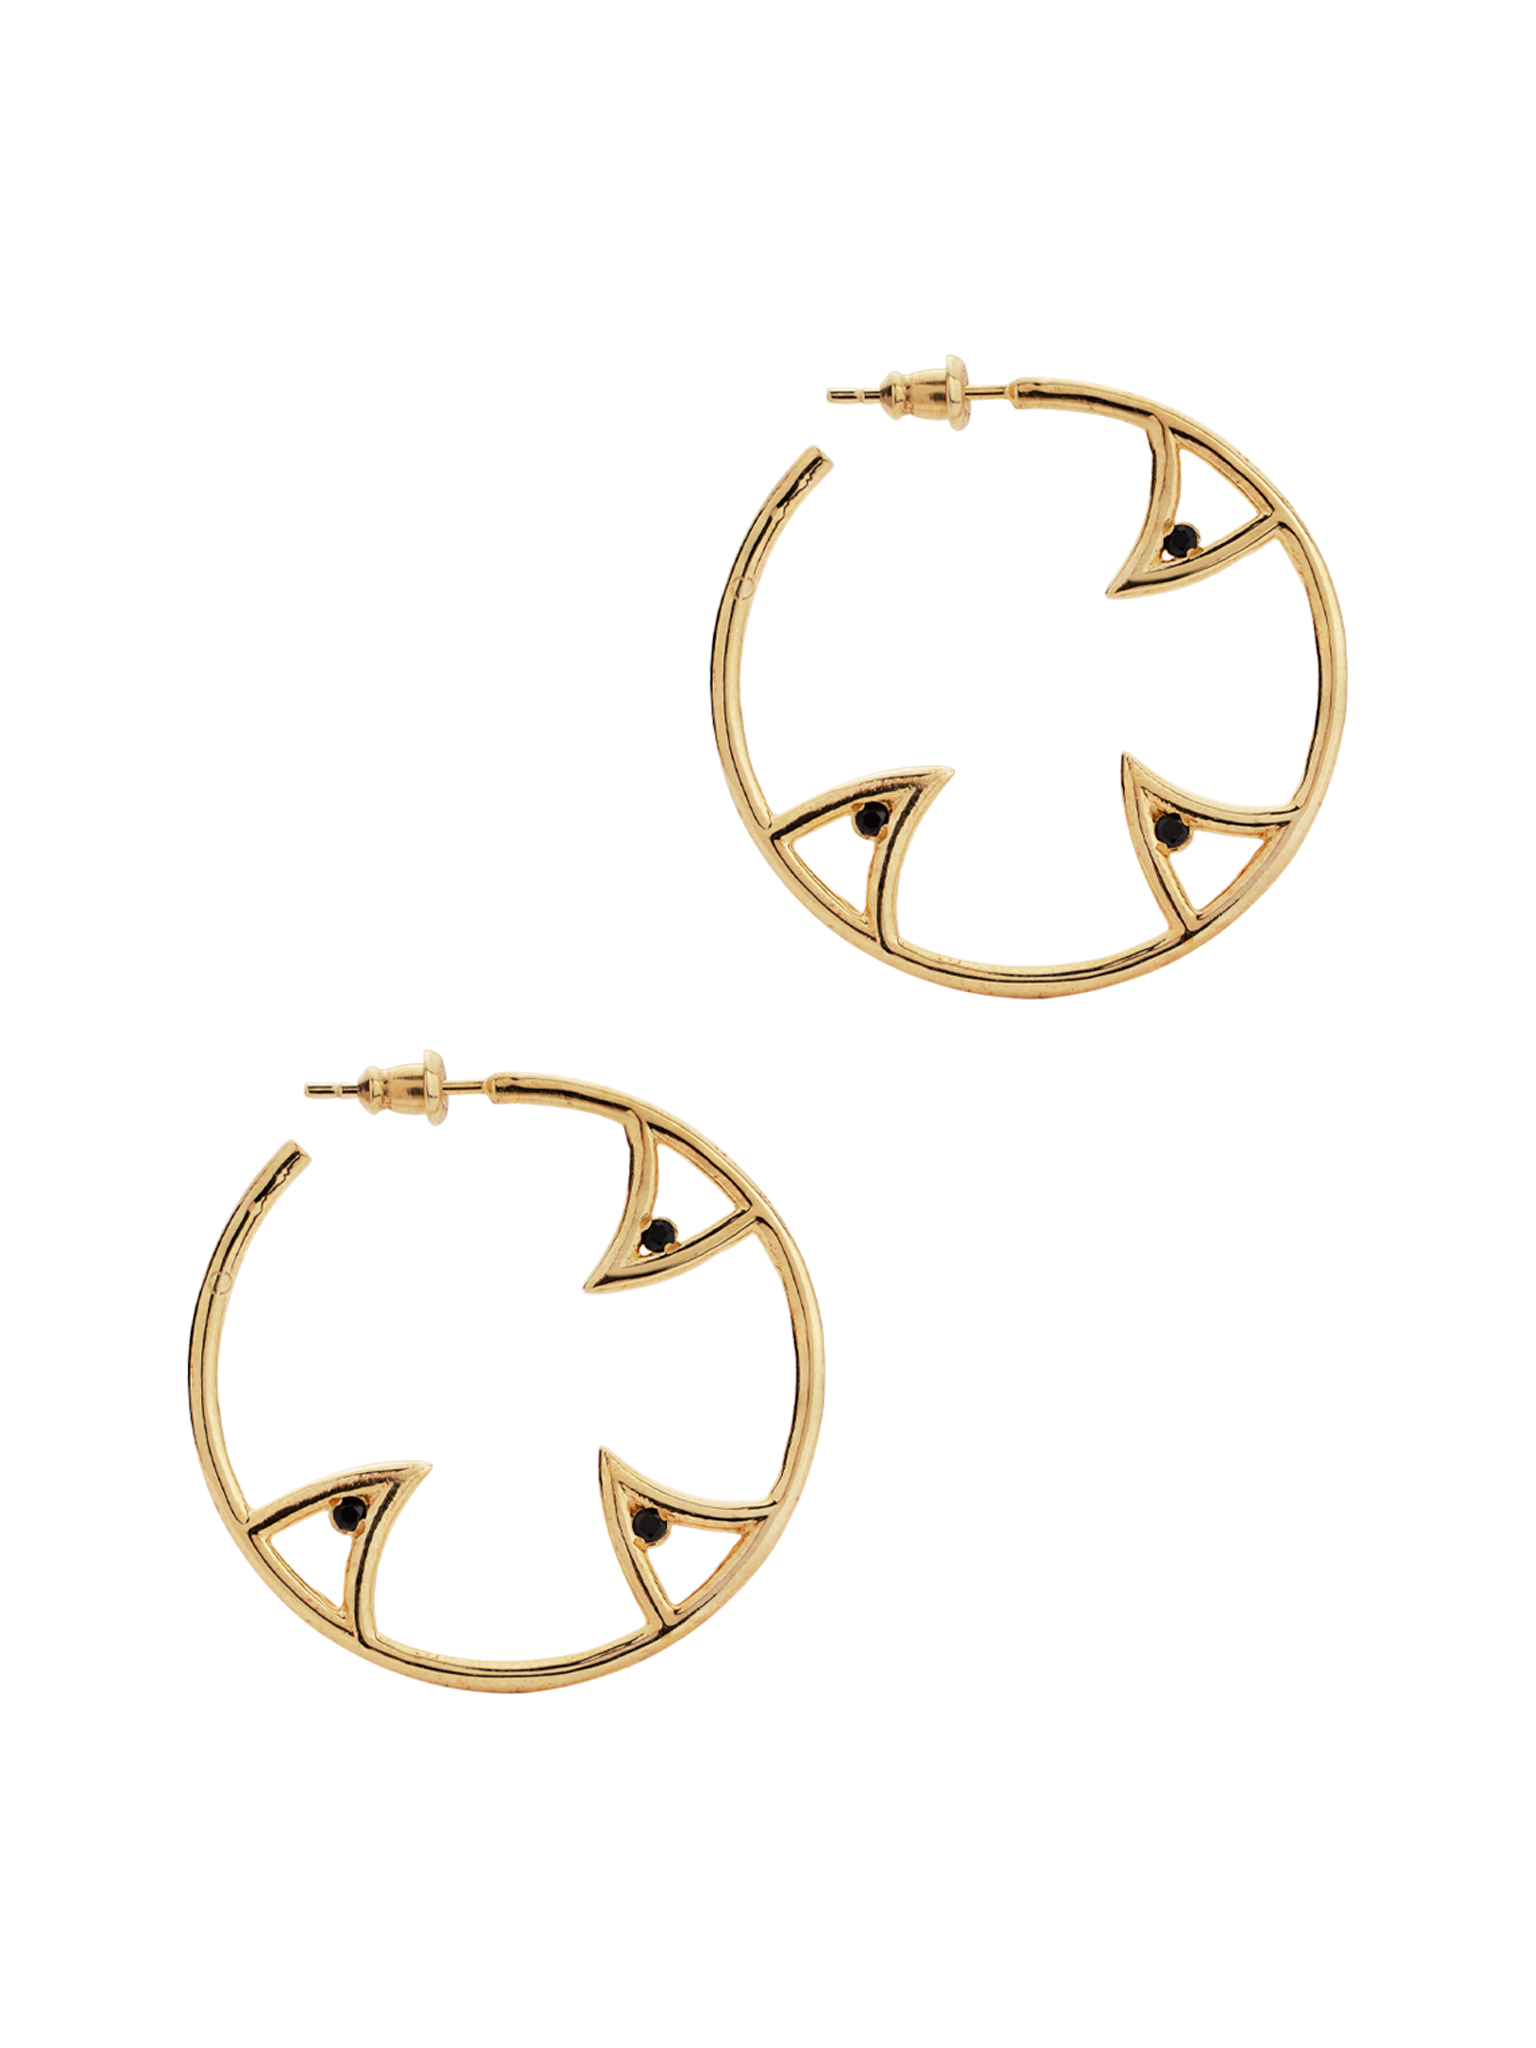 Sharch hoops gold with spinel